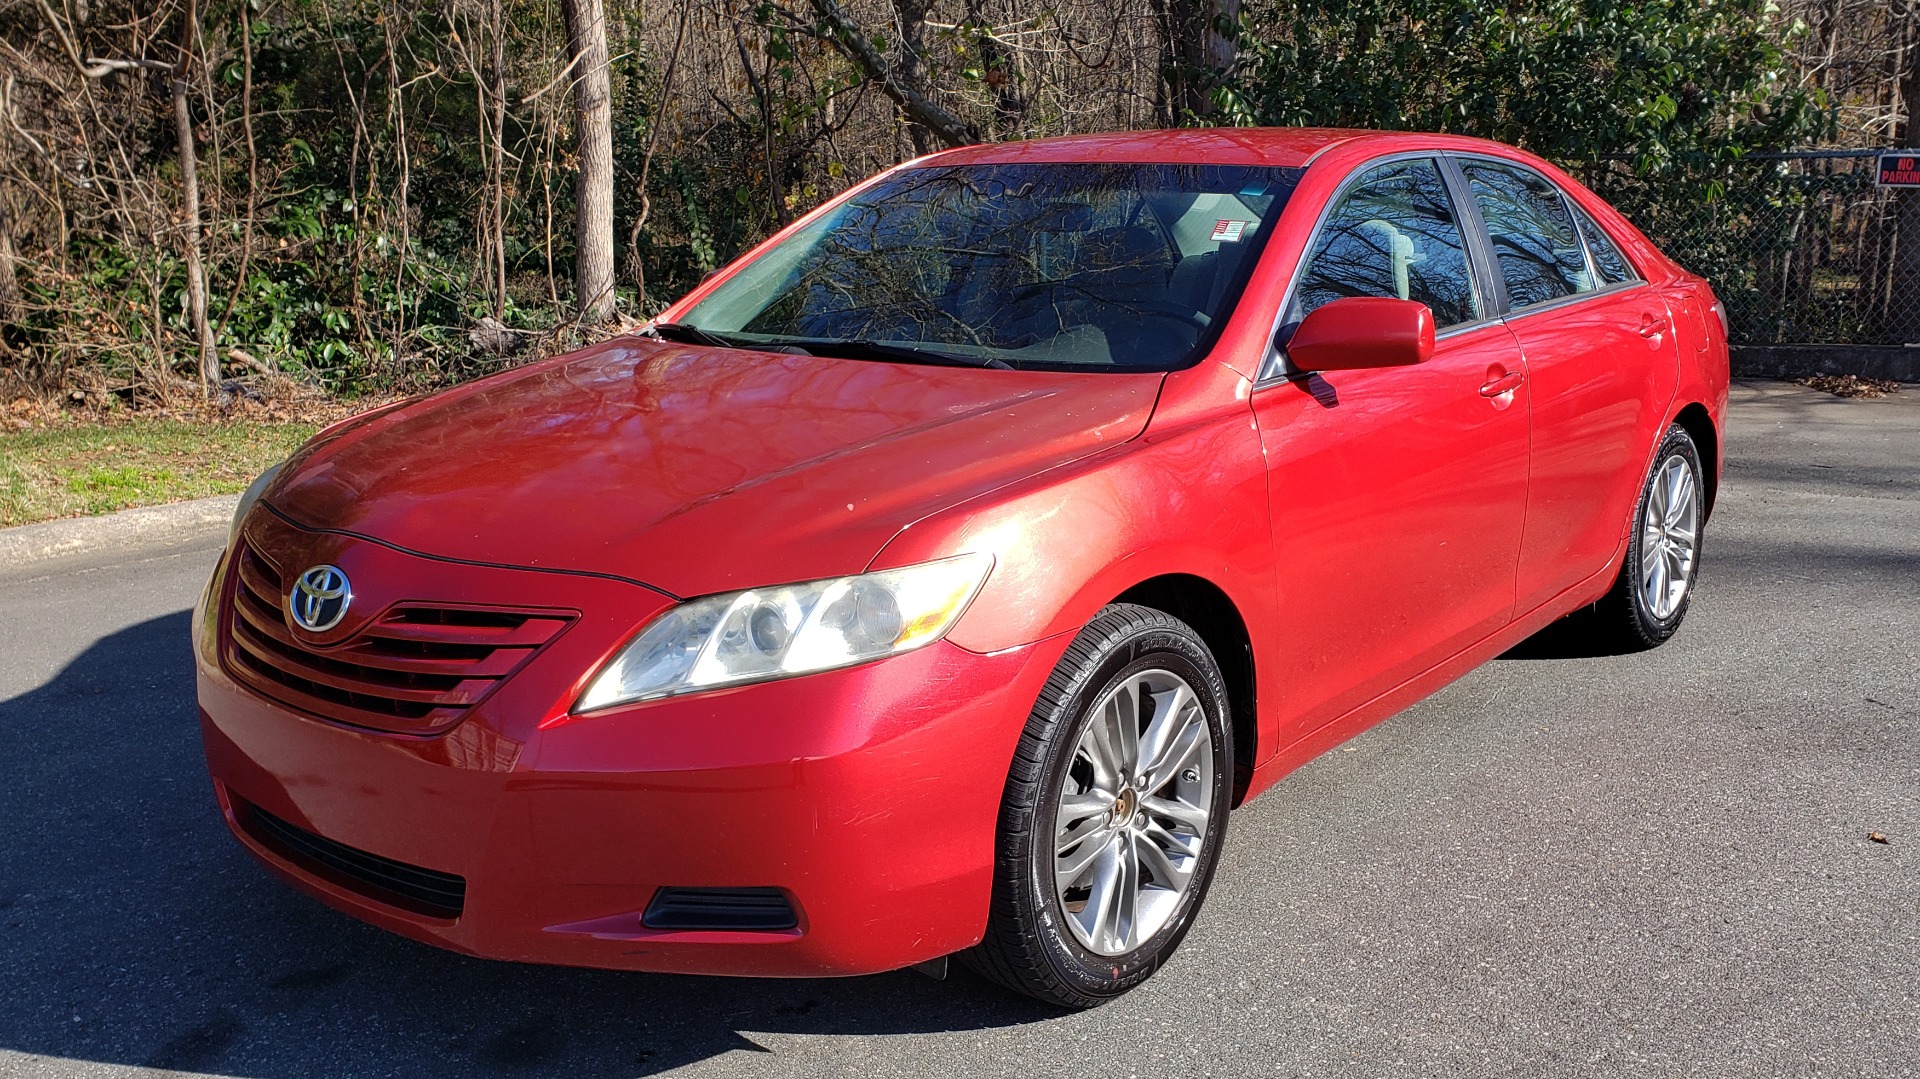 Used 2009 Toyota CAMRY LE / 2.4L SEDAN / FWD / 4-CYL / AUTO / CLOTH / CLEAN for sale Sold at Formula Imports in Charlotte NC 28227 1